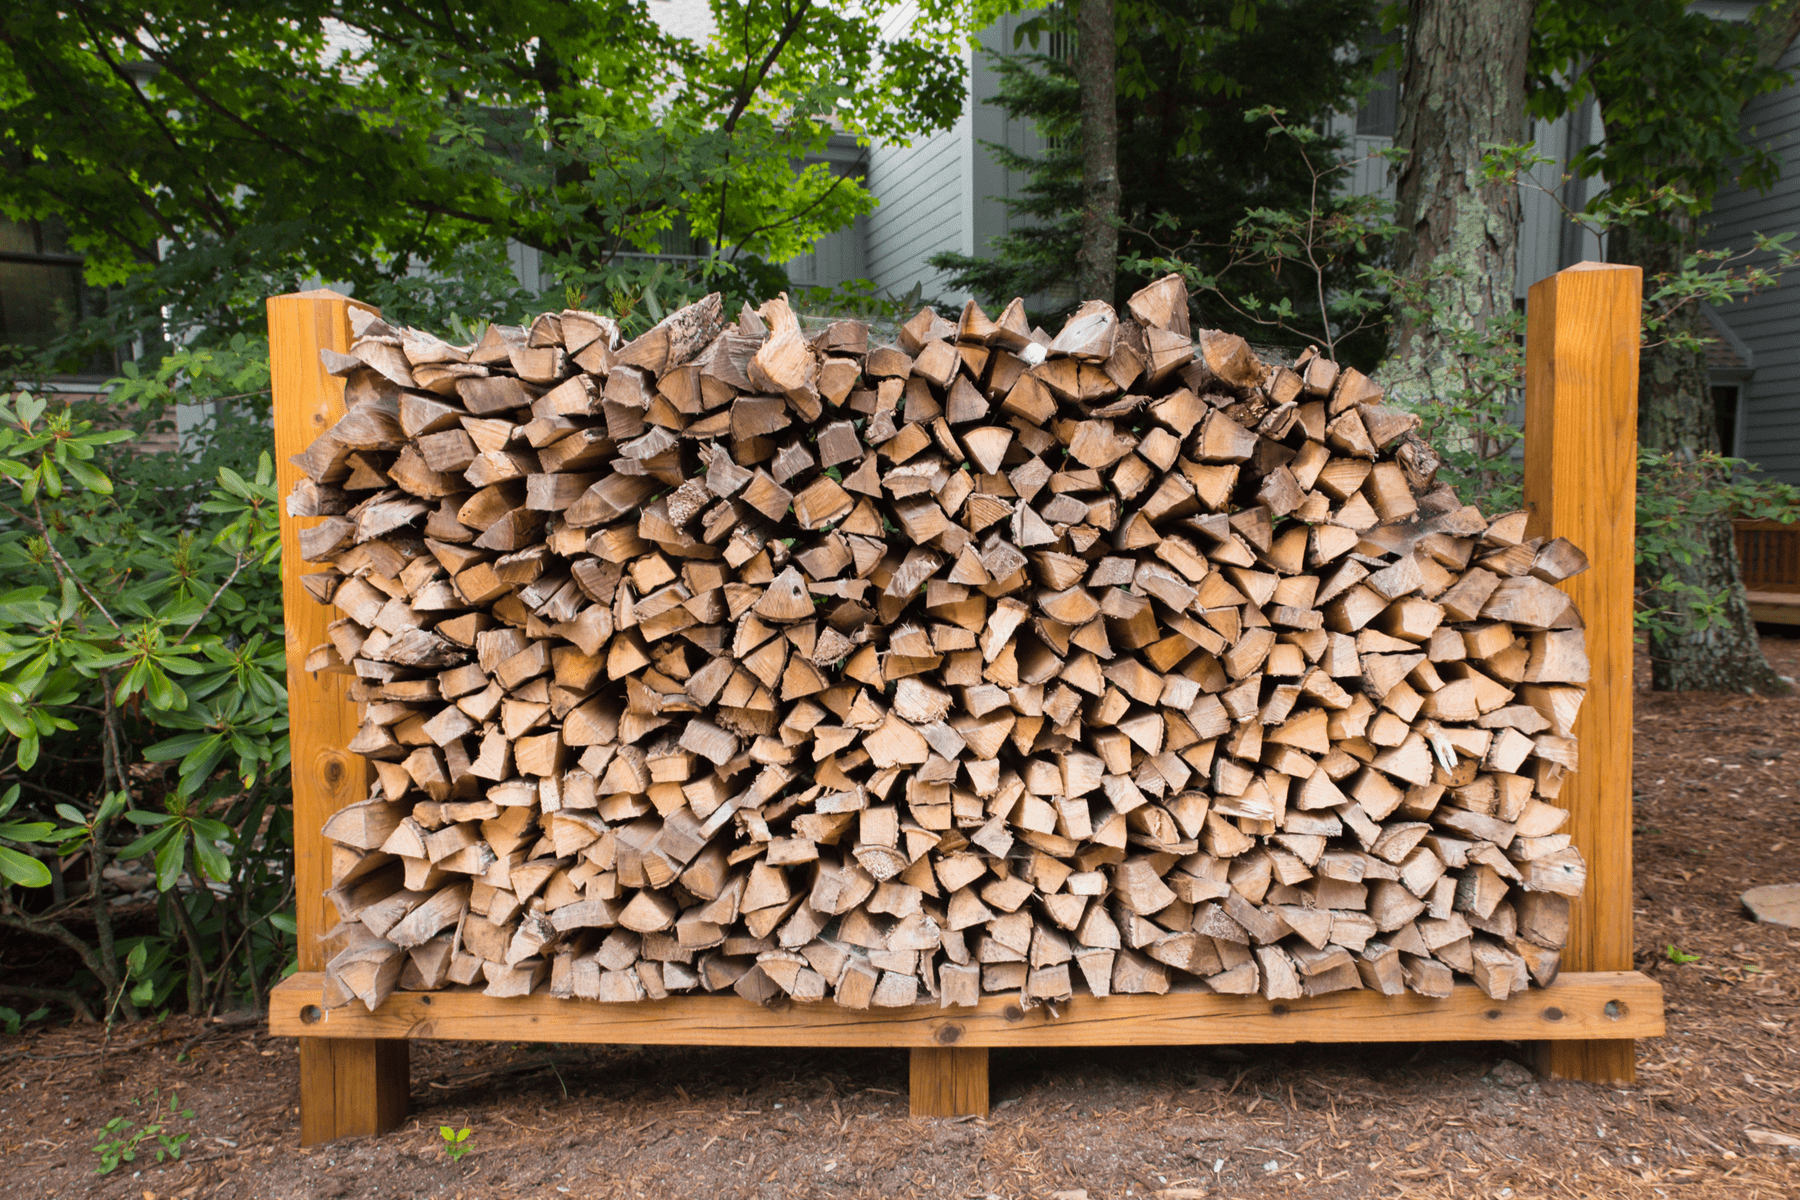 Storing Your Firewood Properly